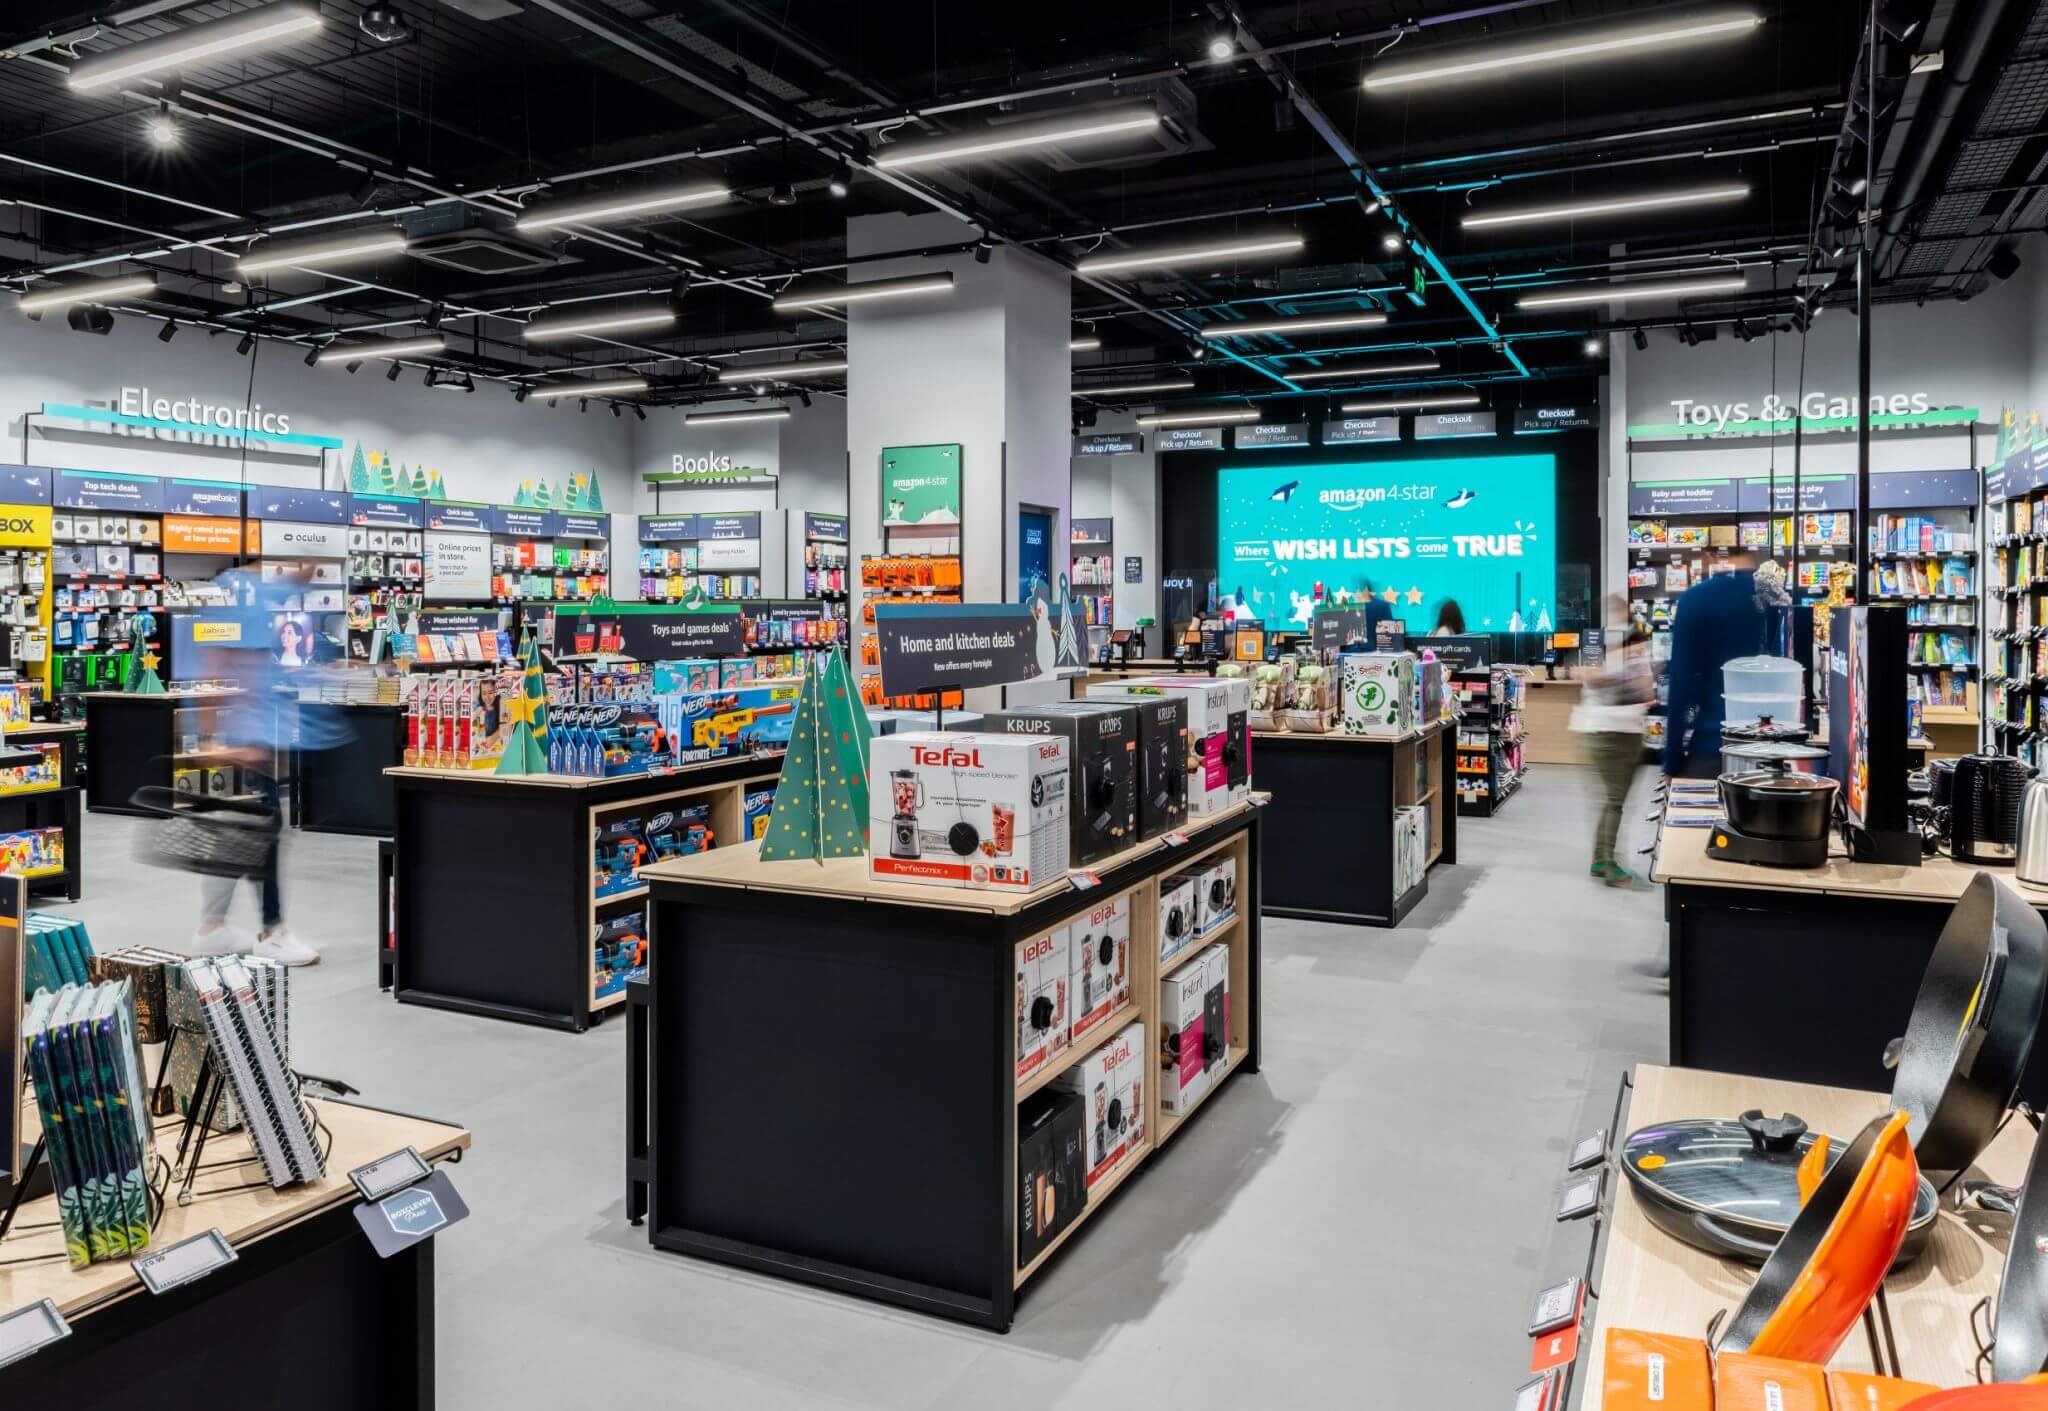 Toys, books, electronics and more at the Amazon 4-star store